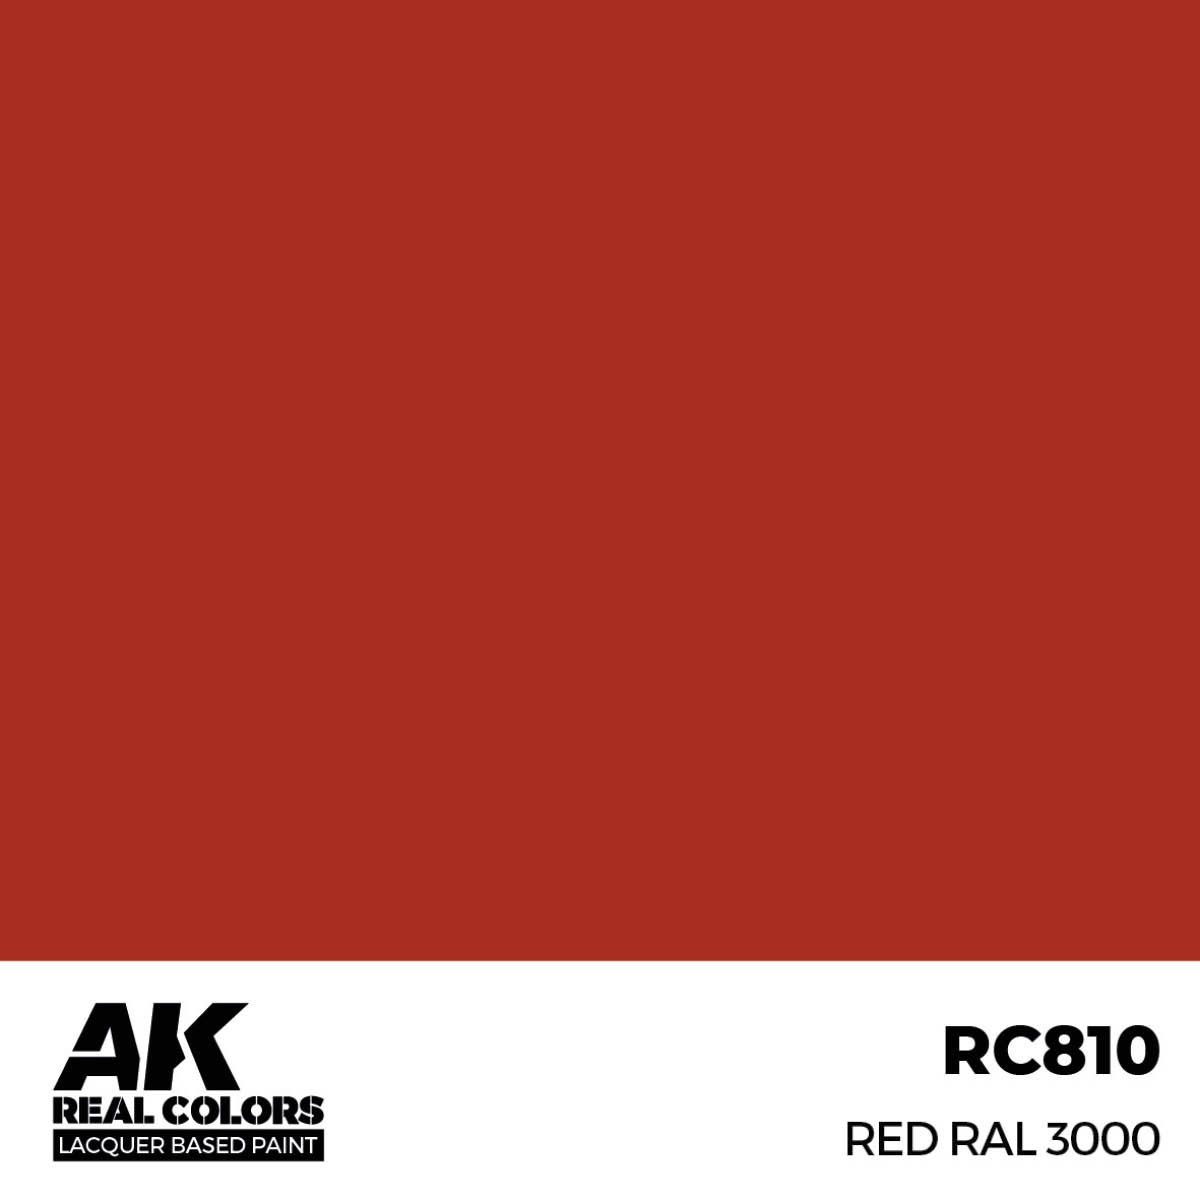 Red RAL 3000